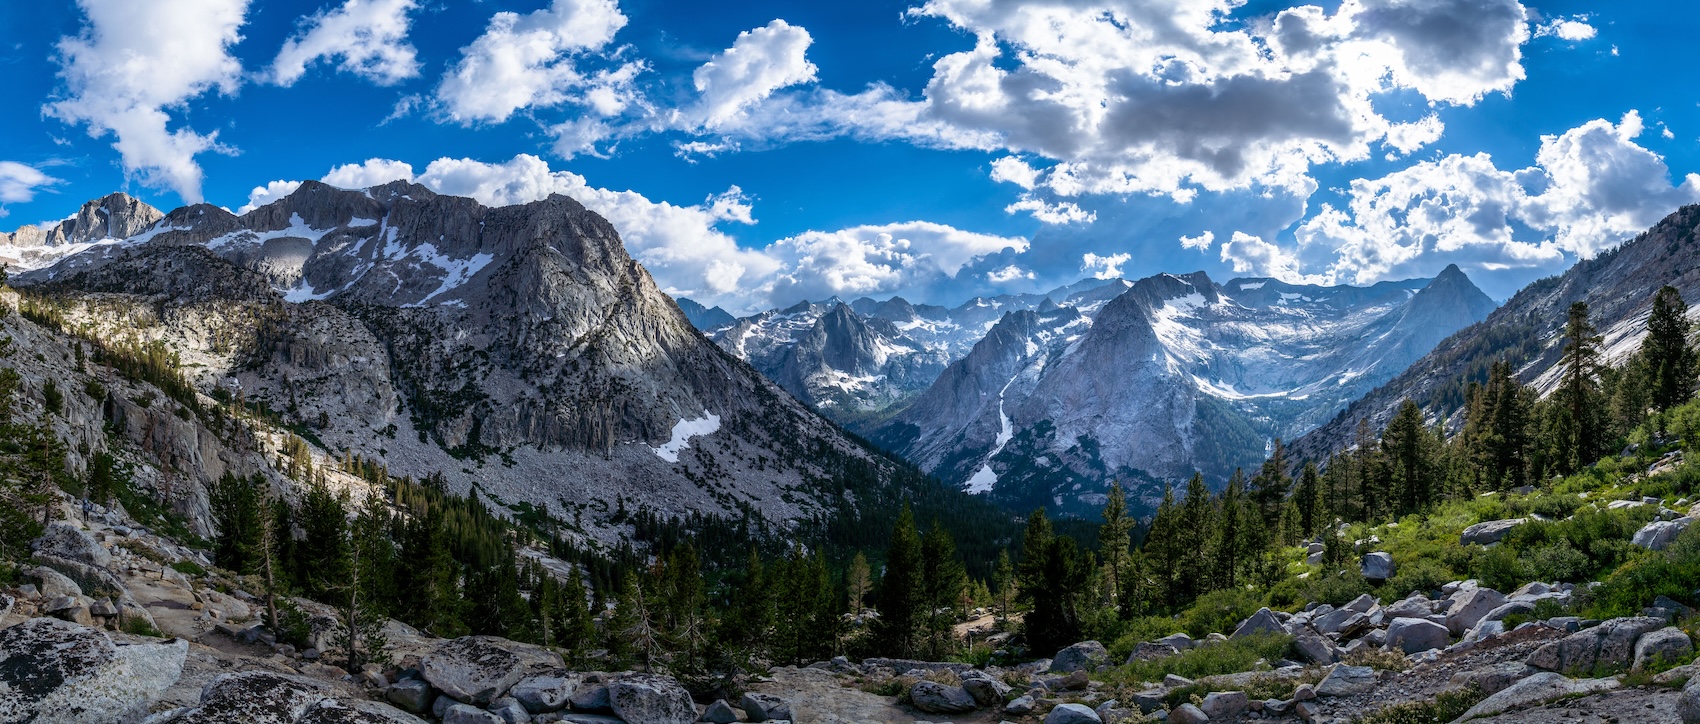 Dramatic clouds above the Middle Fork River Canyon in Kings Canyon National Park